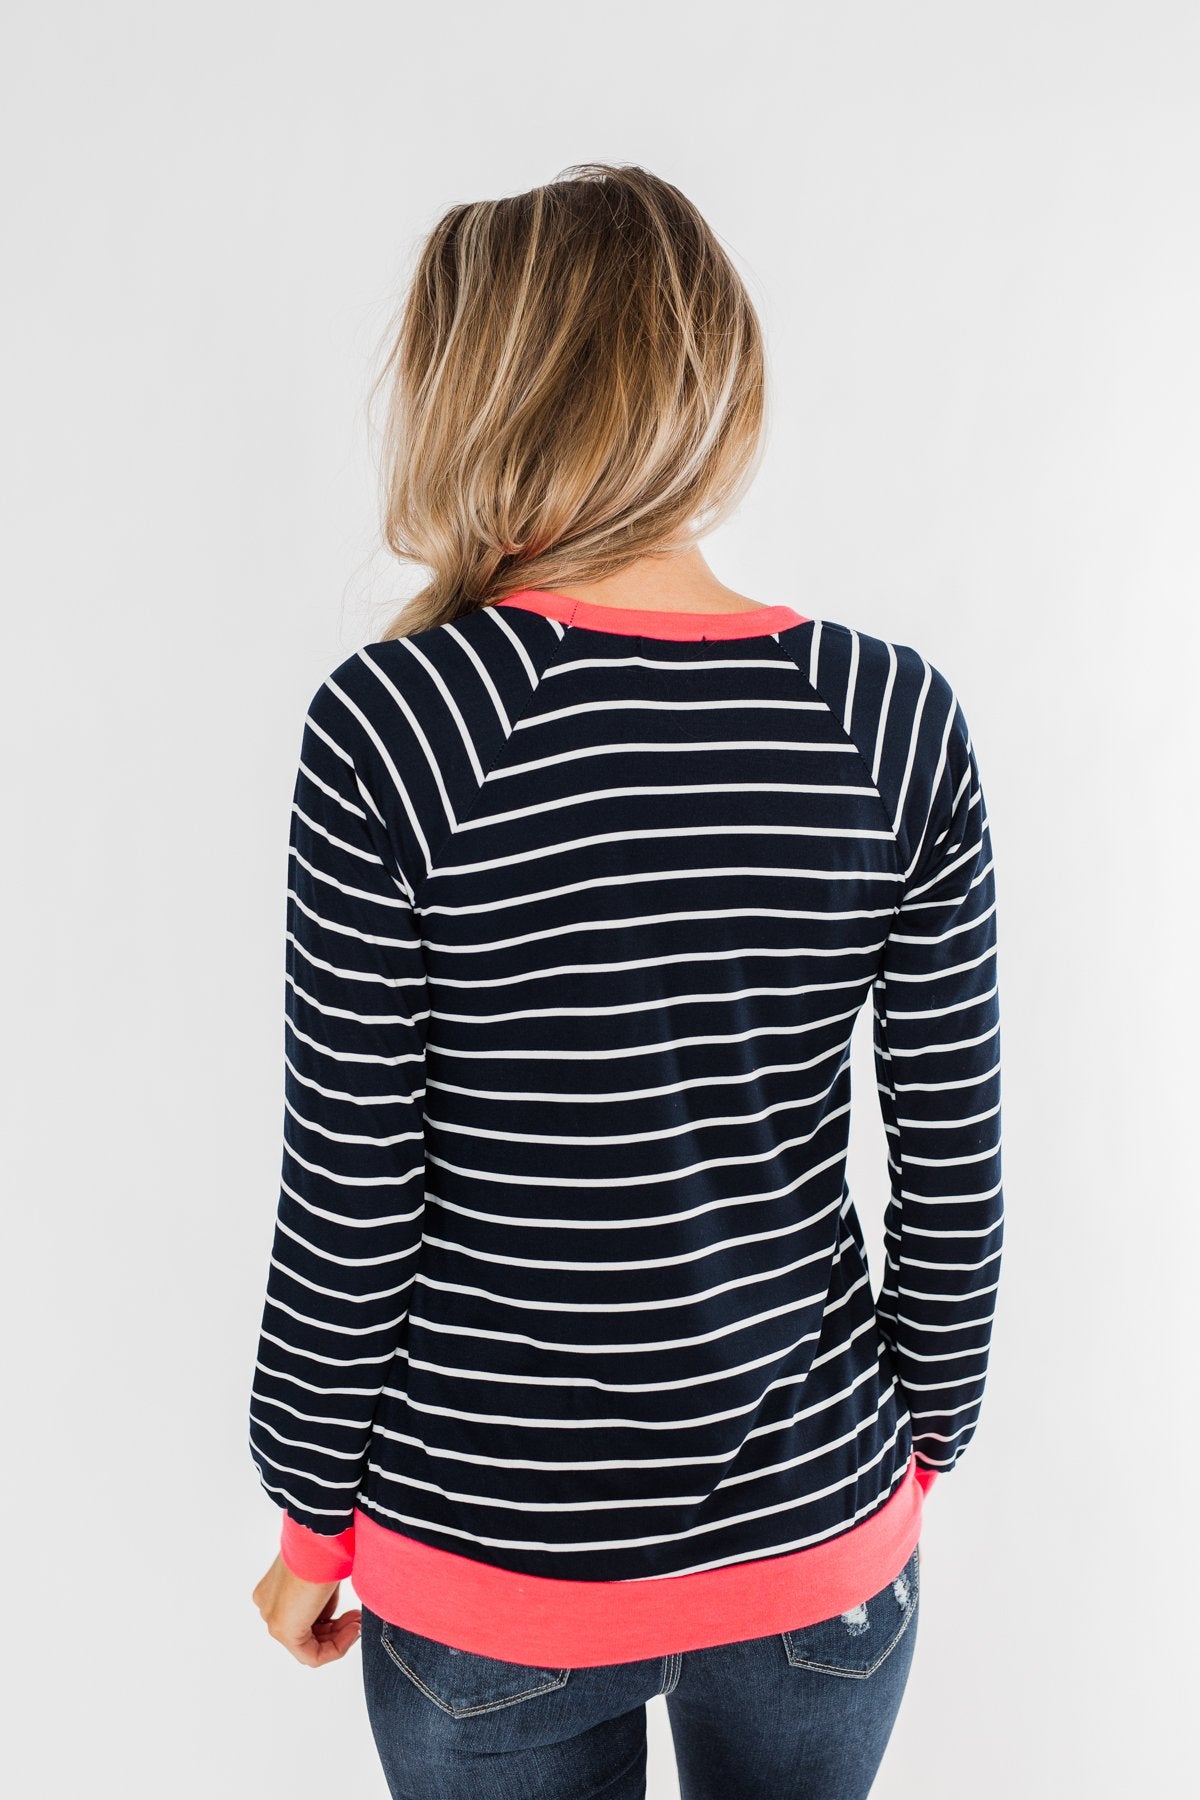 On Top Of The World Striped Top- Navy & Neon Pink